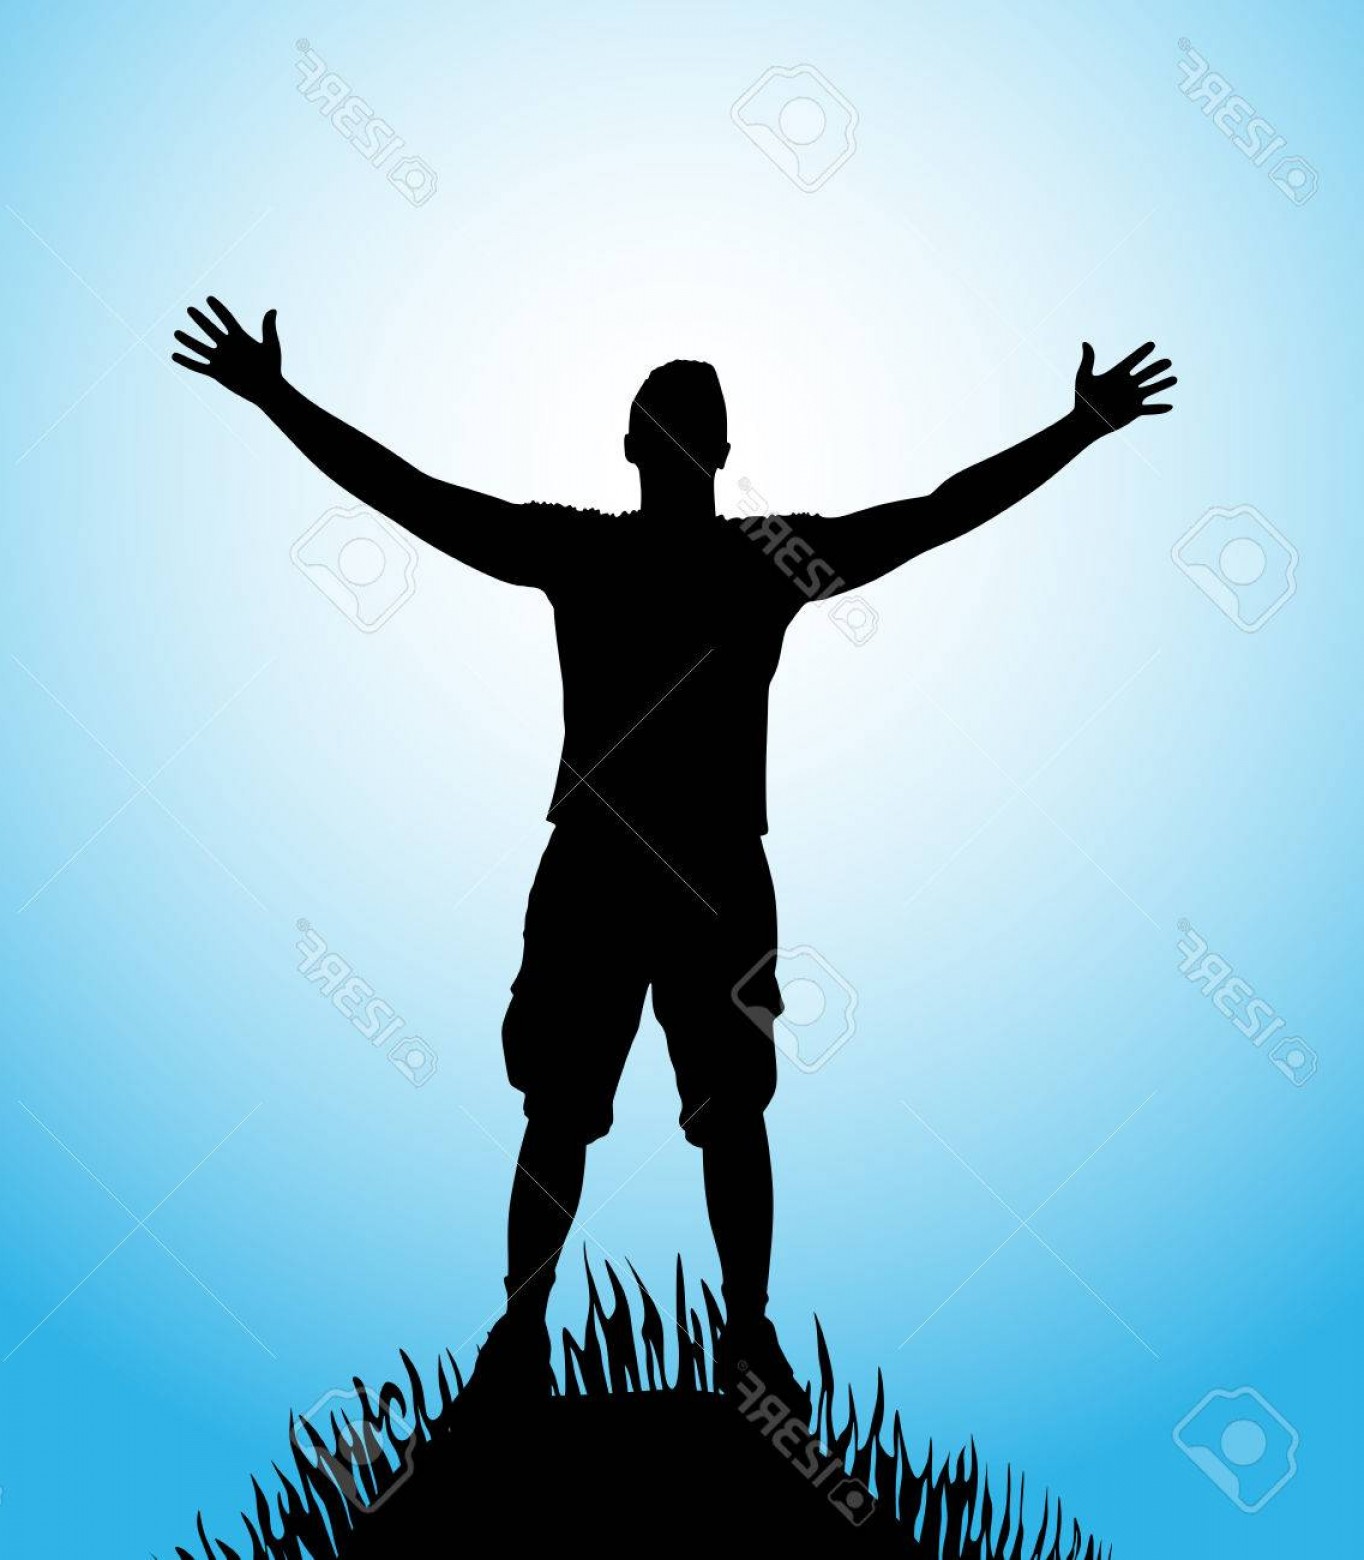 Photostock Vector Silhouette Of Man With Open Arms On Hill | SHOPATCLOTH